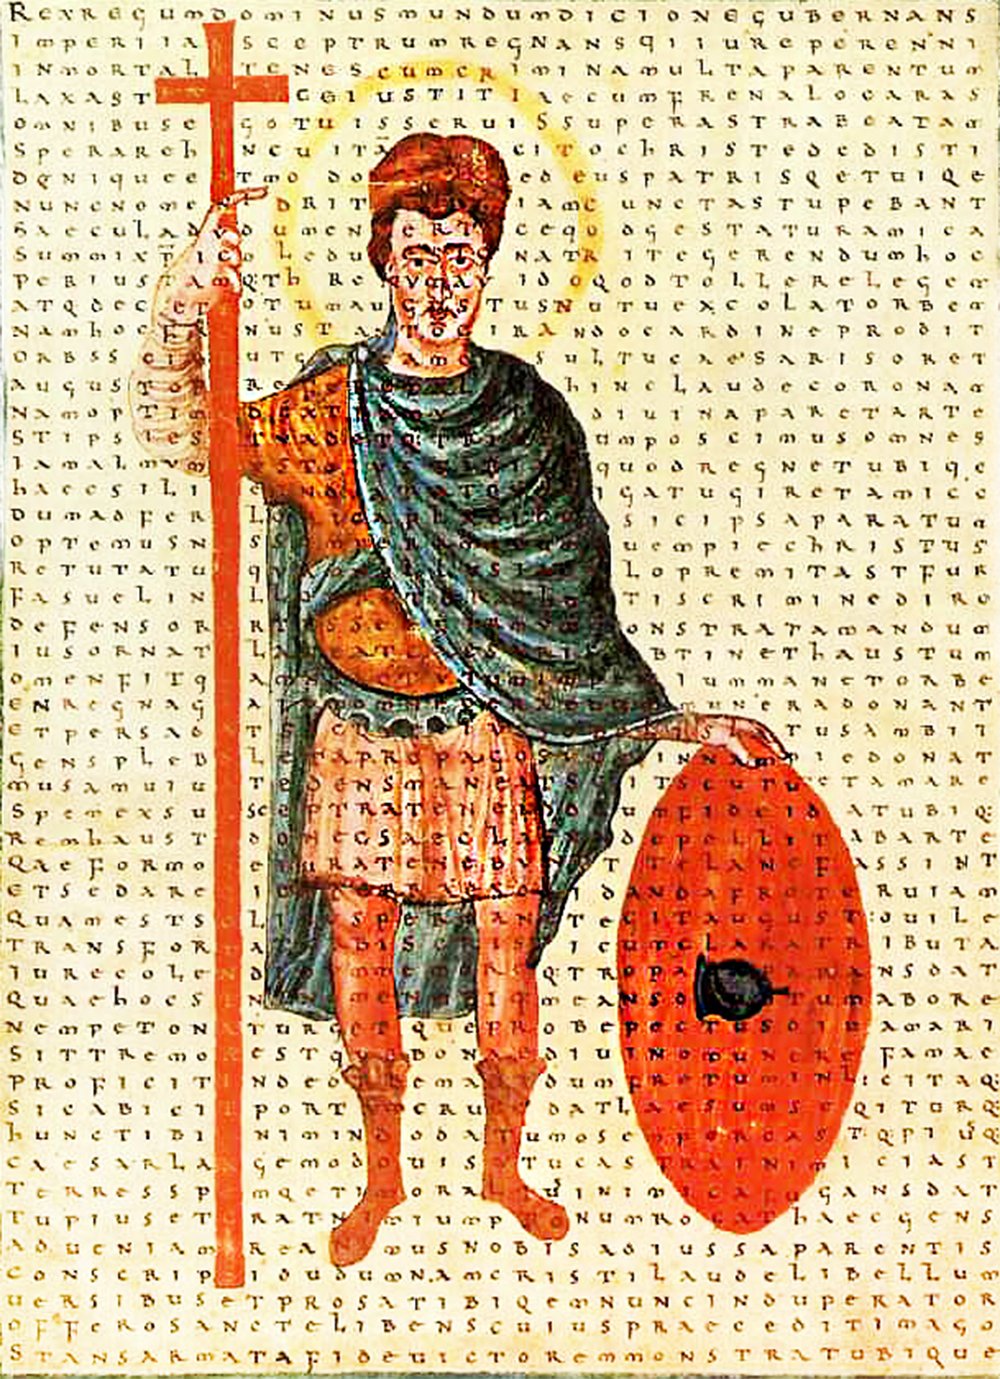 An image of a medieval manuscript illustration of Louis the Pious. He is wearing a red cloak and is holding a cross and a shield.